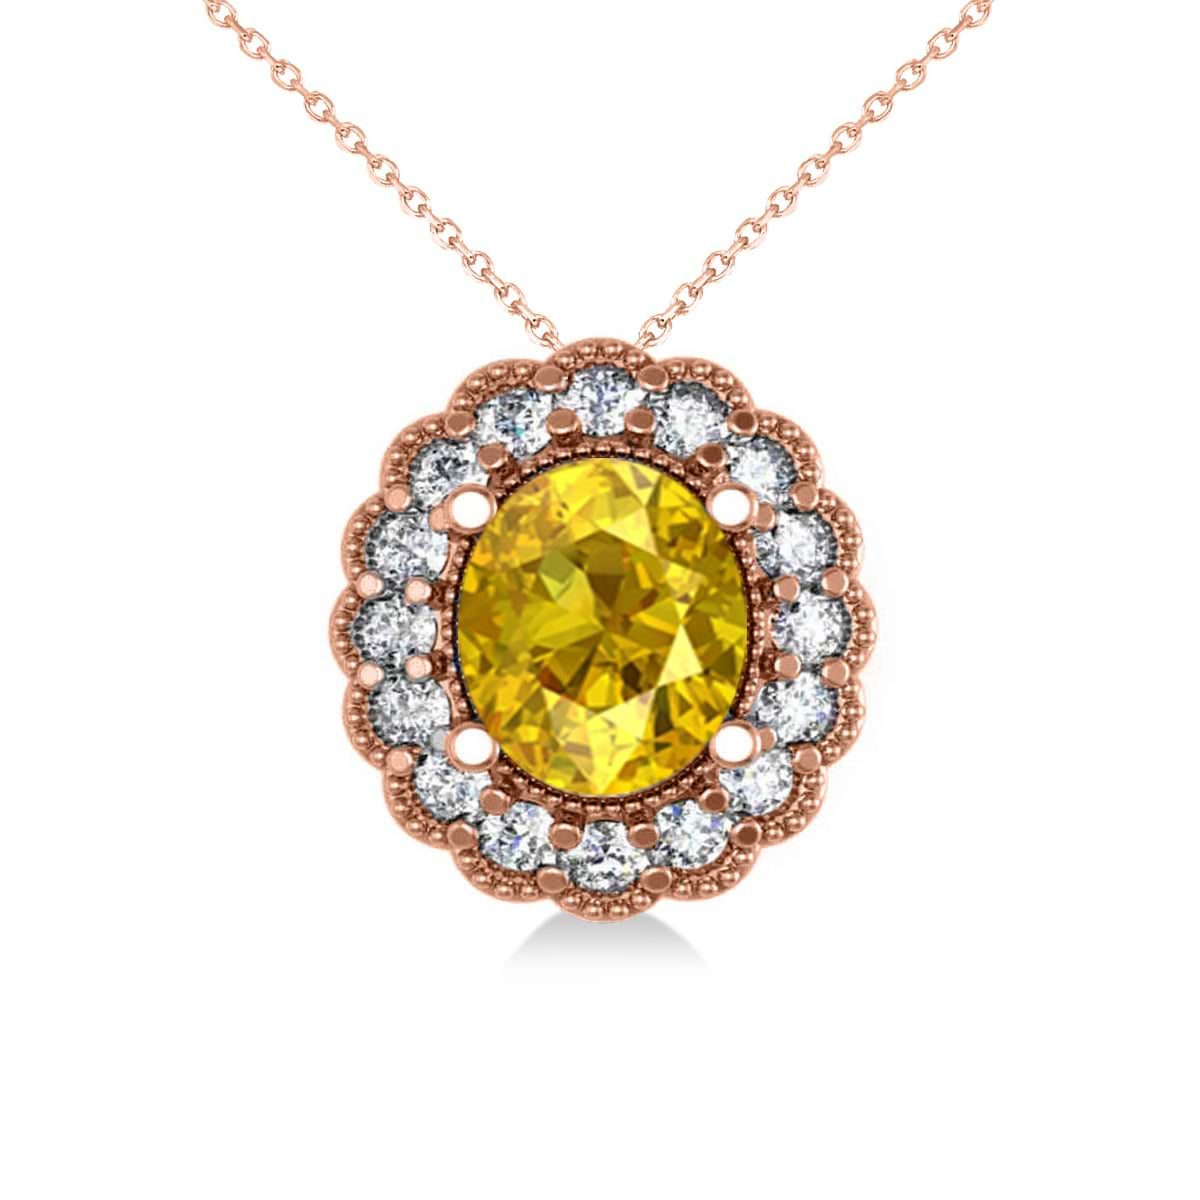 Yellow Sapphire & Diamond Floral Oval Pendant Necklace 14k Rose Gold (2.98ct)